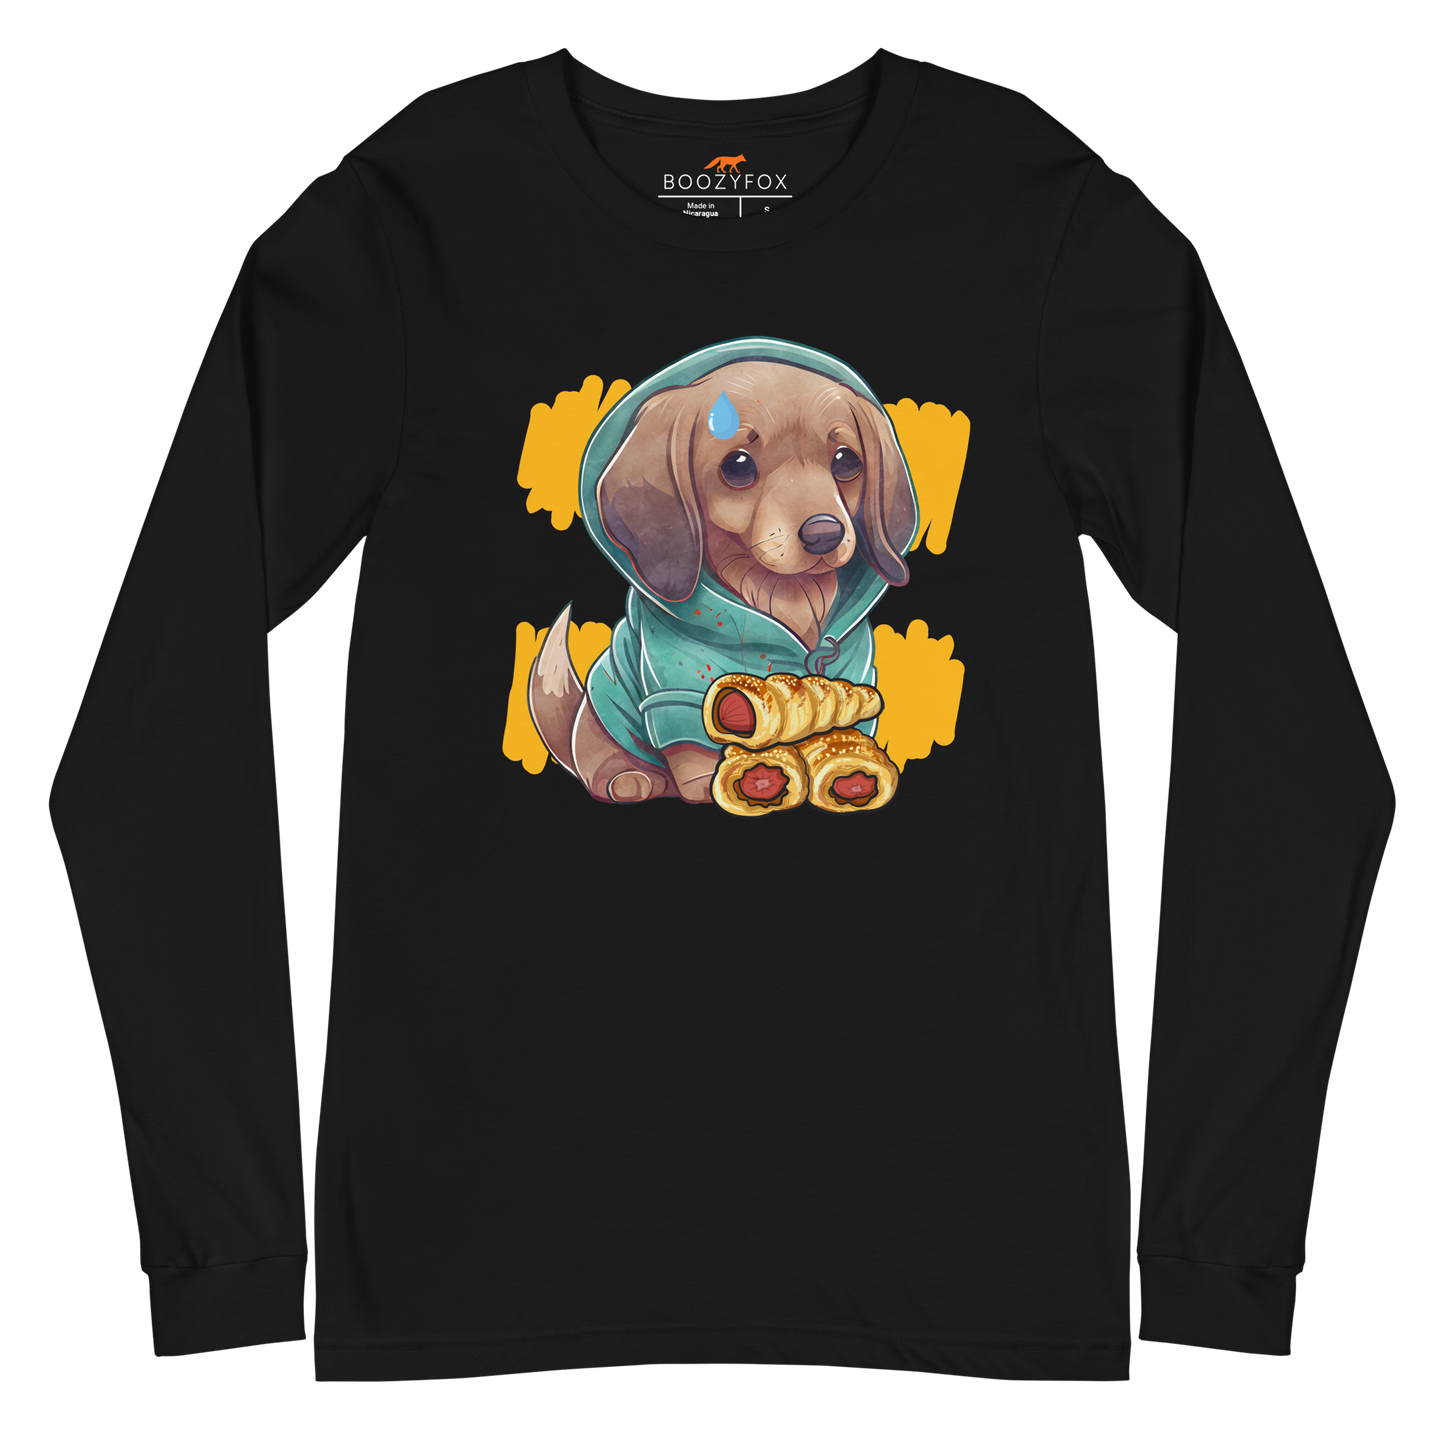 Black Sausage Dog Long Sleeve Tee featuring a charming Sausage Roll Dachshund graphic on the chest - Cute Sausage Dog Long Sleeve Graphic Tees - Boozy Fox